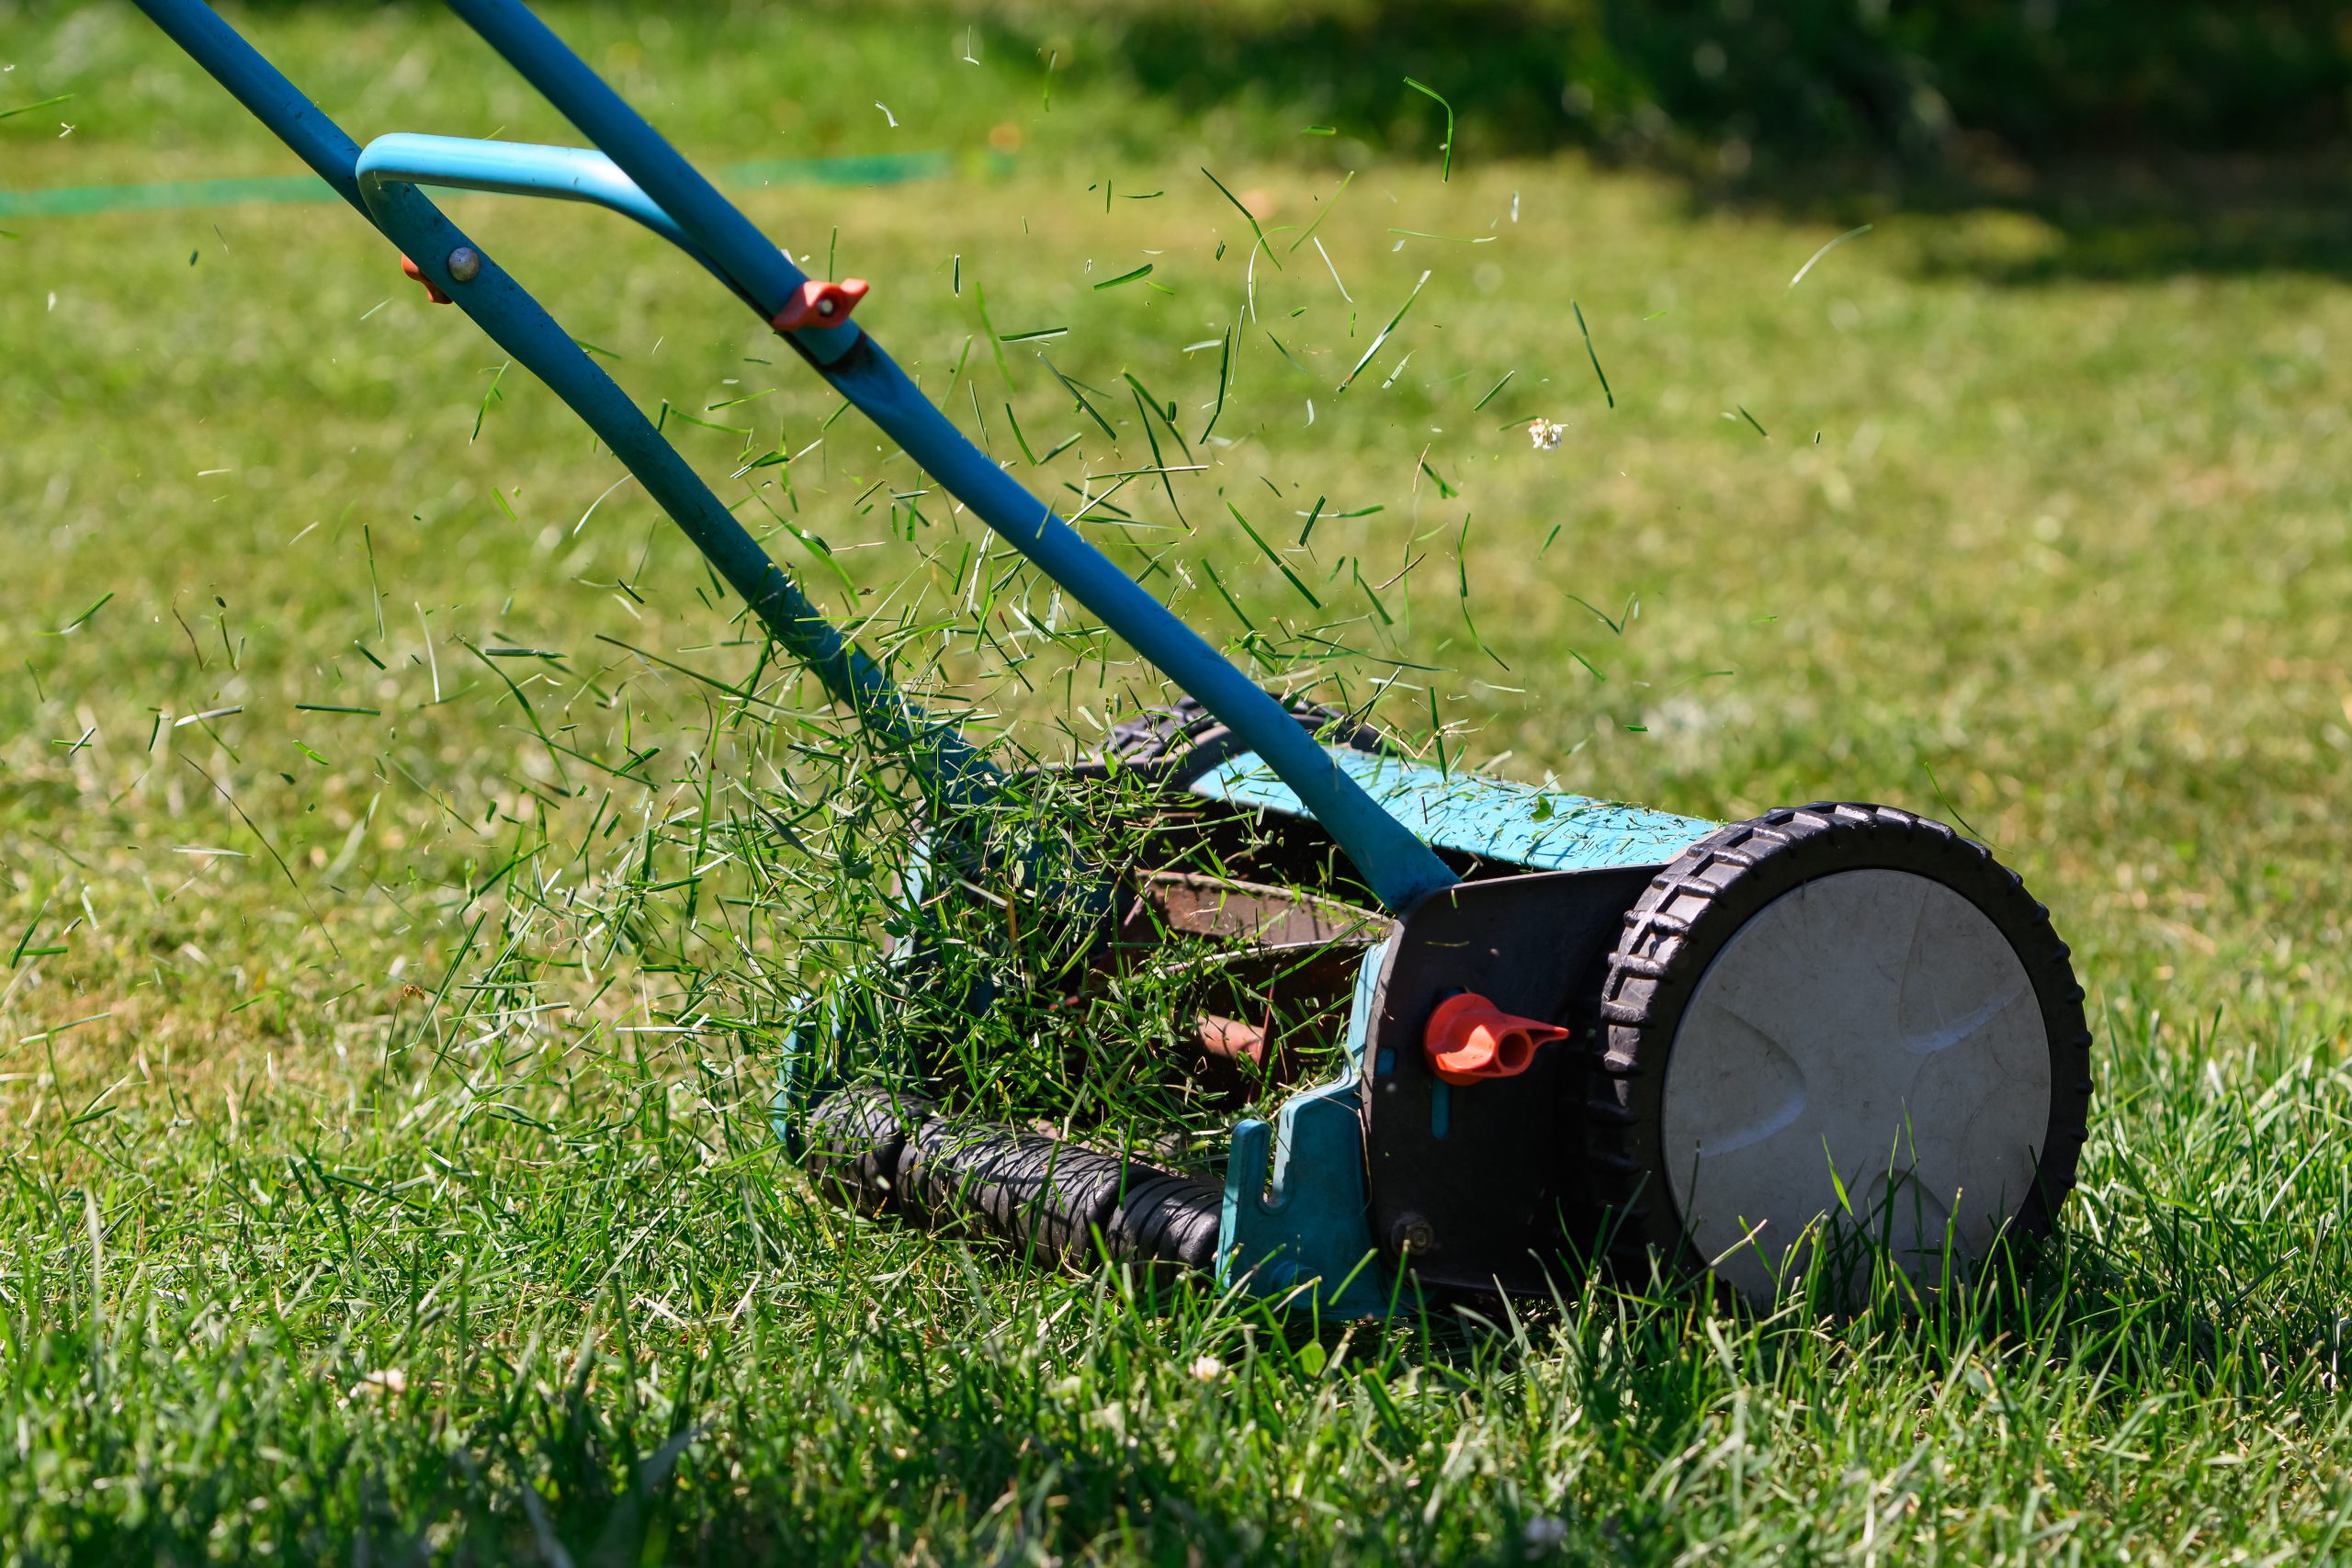 Go green with a push mower for an eco-friendly lawn care solution.